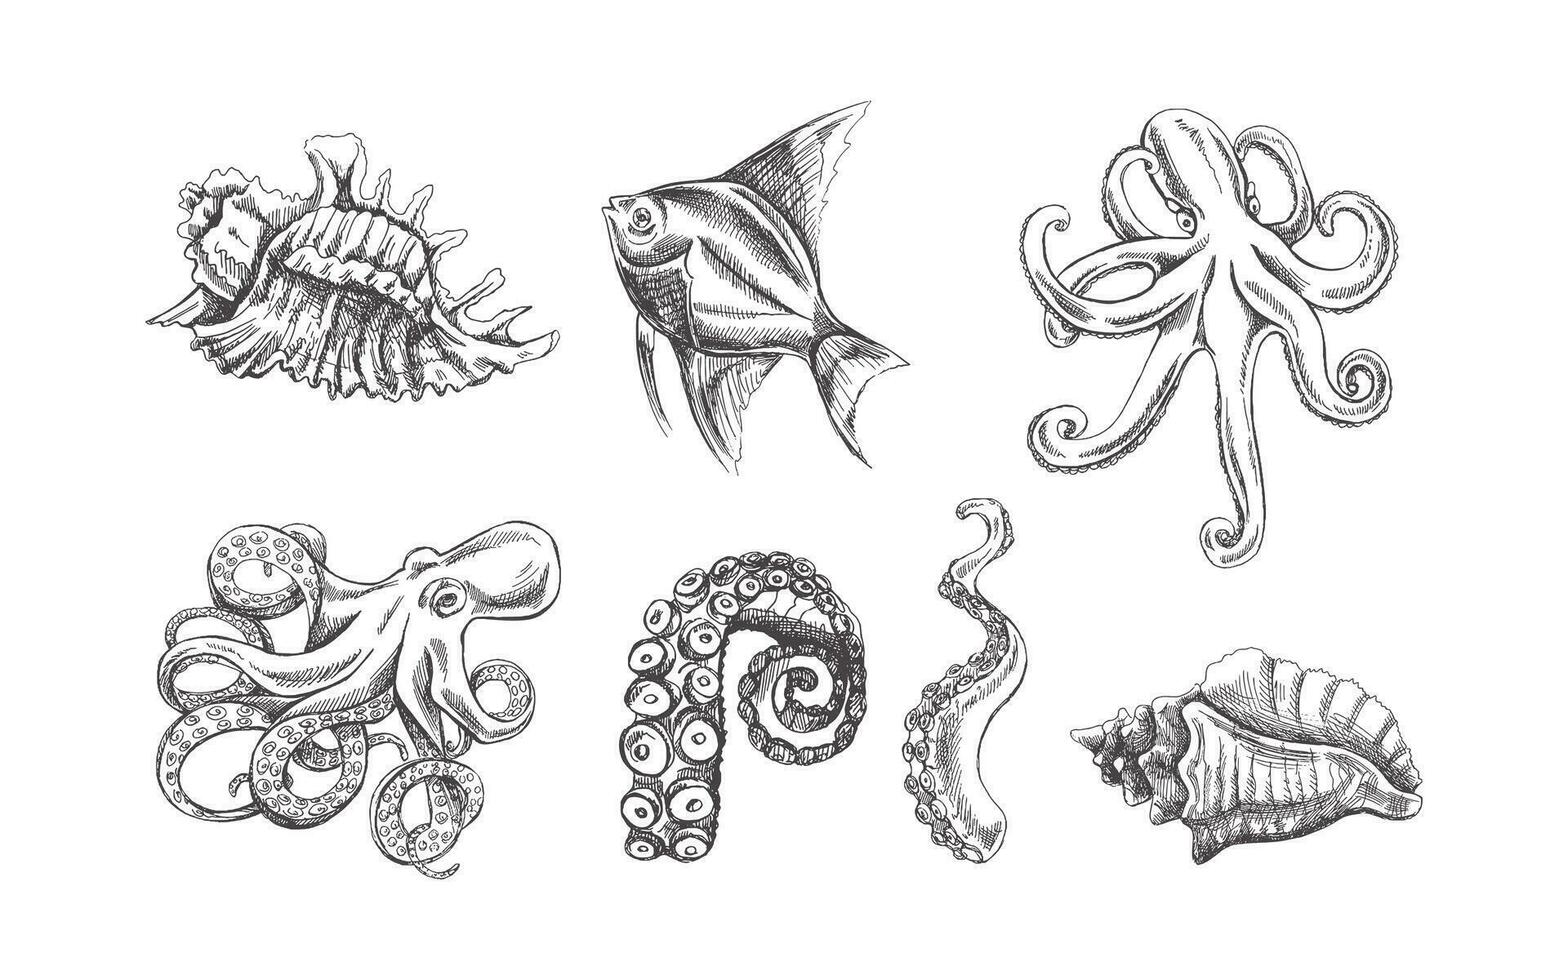 Seashells,  octopus, tropical fish, octopus tentacle vector set. Hand drawn sketch illustration. Collection of realistic ocean creatures  isolated on white background.